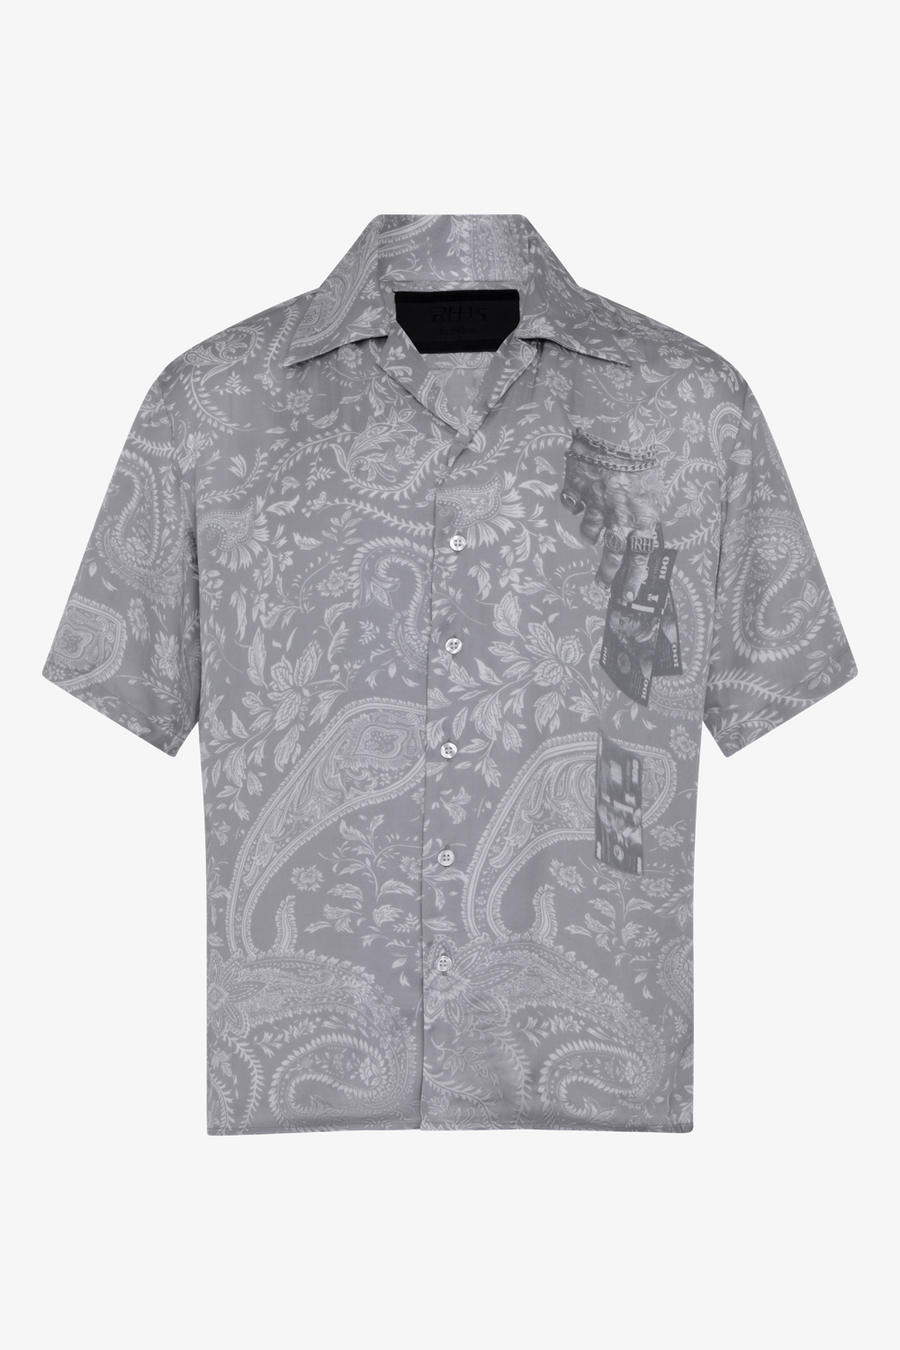 Buy the RH45 Pluto Hawaiian Shirt in Grey at Intro. Spend £50 for free UK delivery. Official stockists. We ship worldwide.